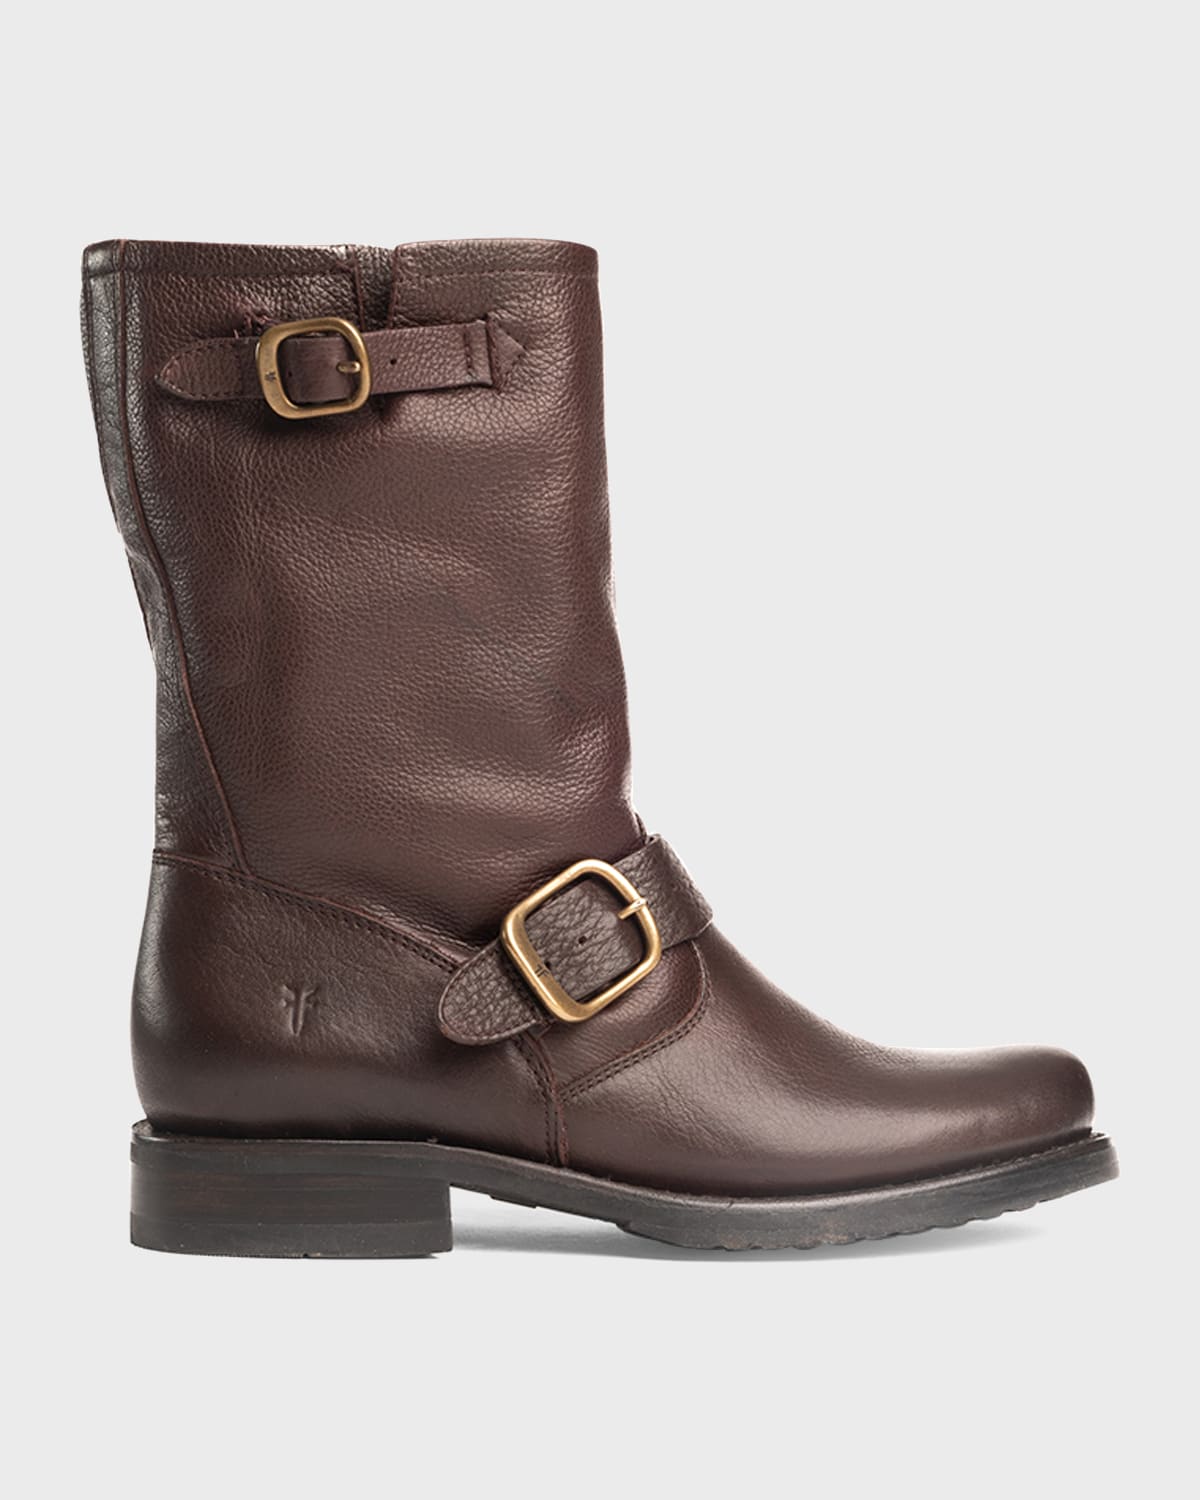 Frye Veronica Leather Buckle Short Moto Boots